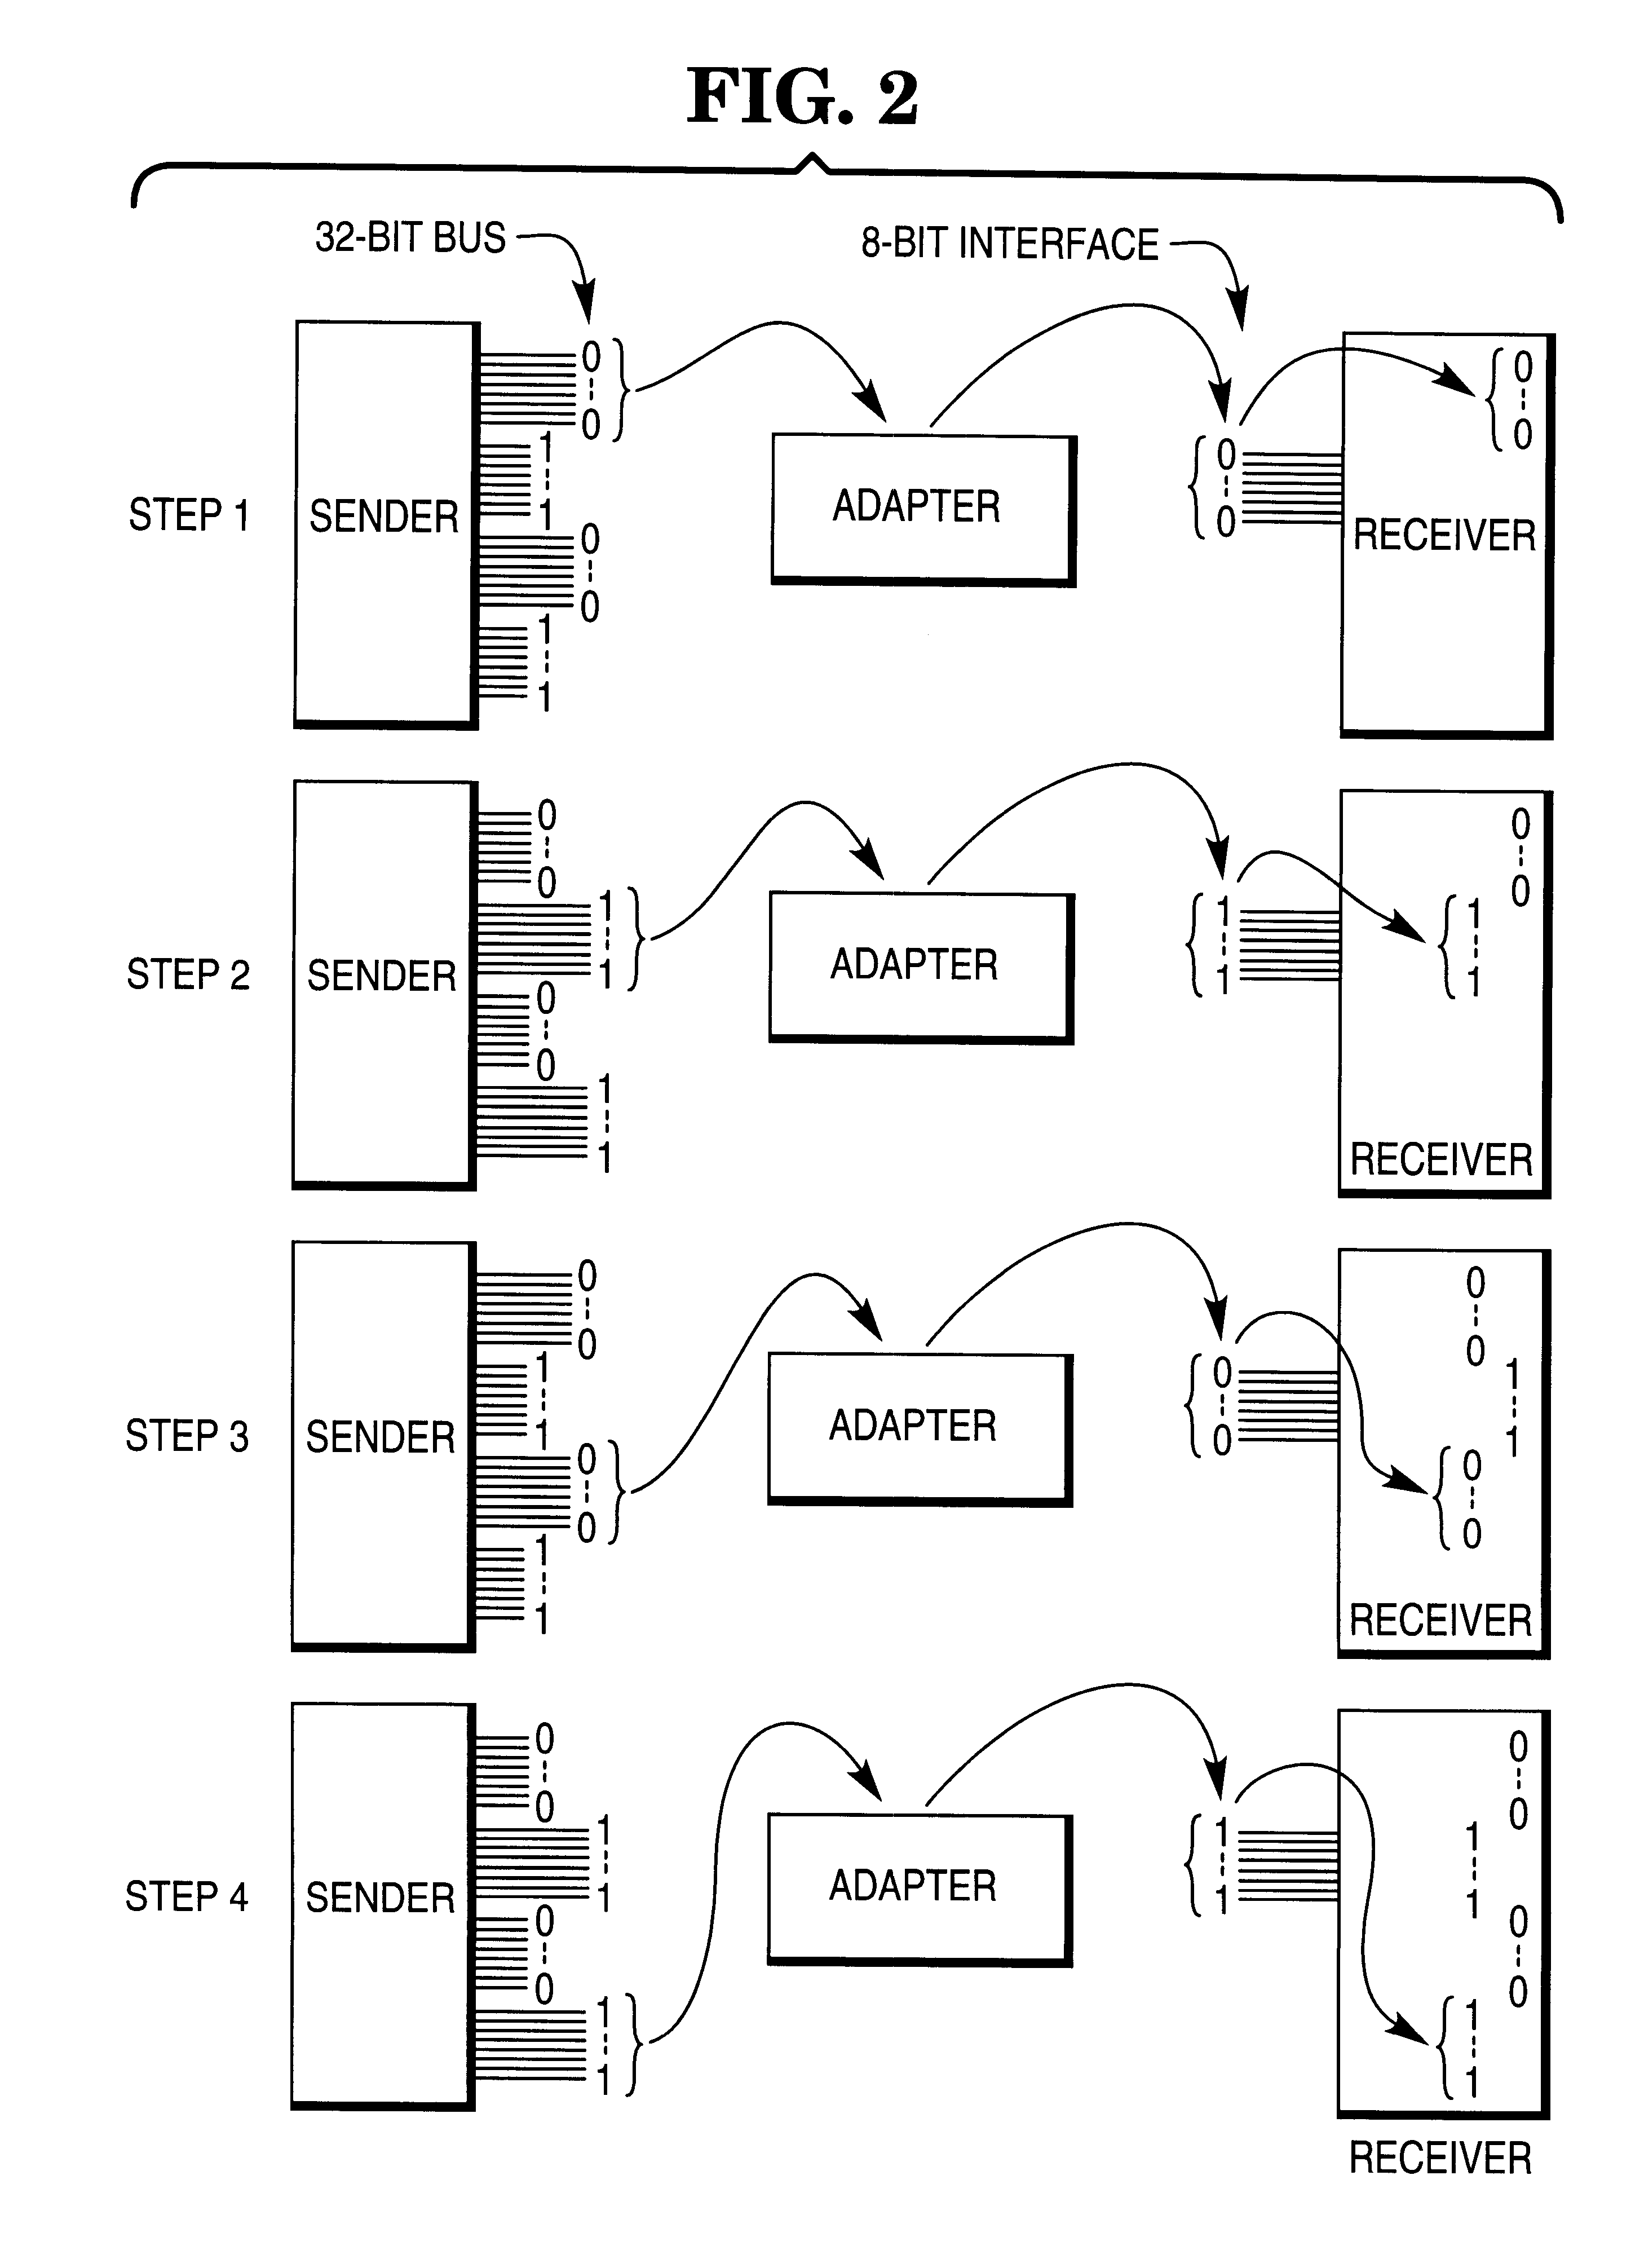 Tunable architecture for device adapter